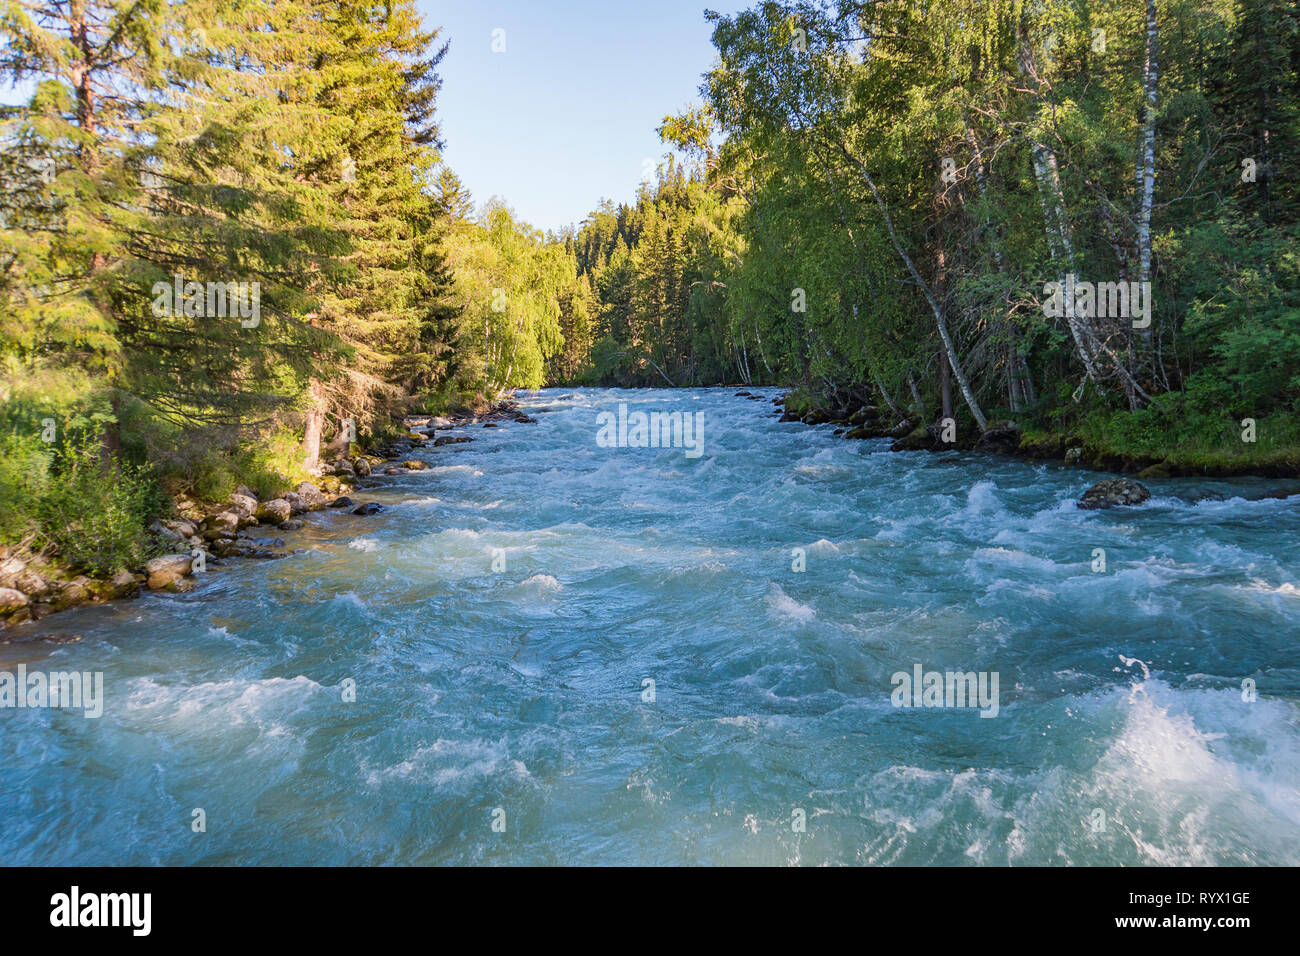 Mountain River Flows Between The Trees In The Siberian Taiga After A Flood Of The Mountain River Altai Siberia Stock Photo Alamy